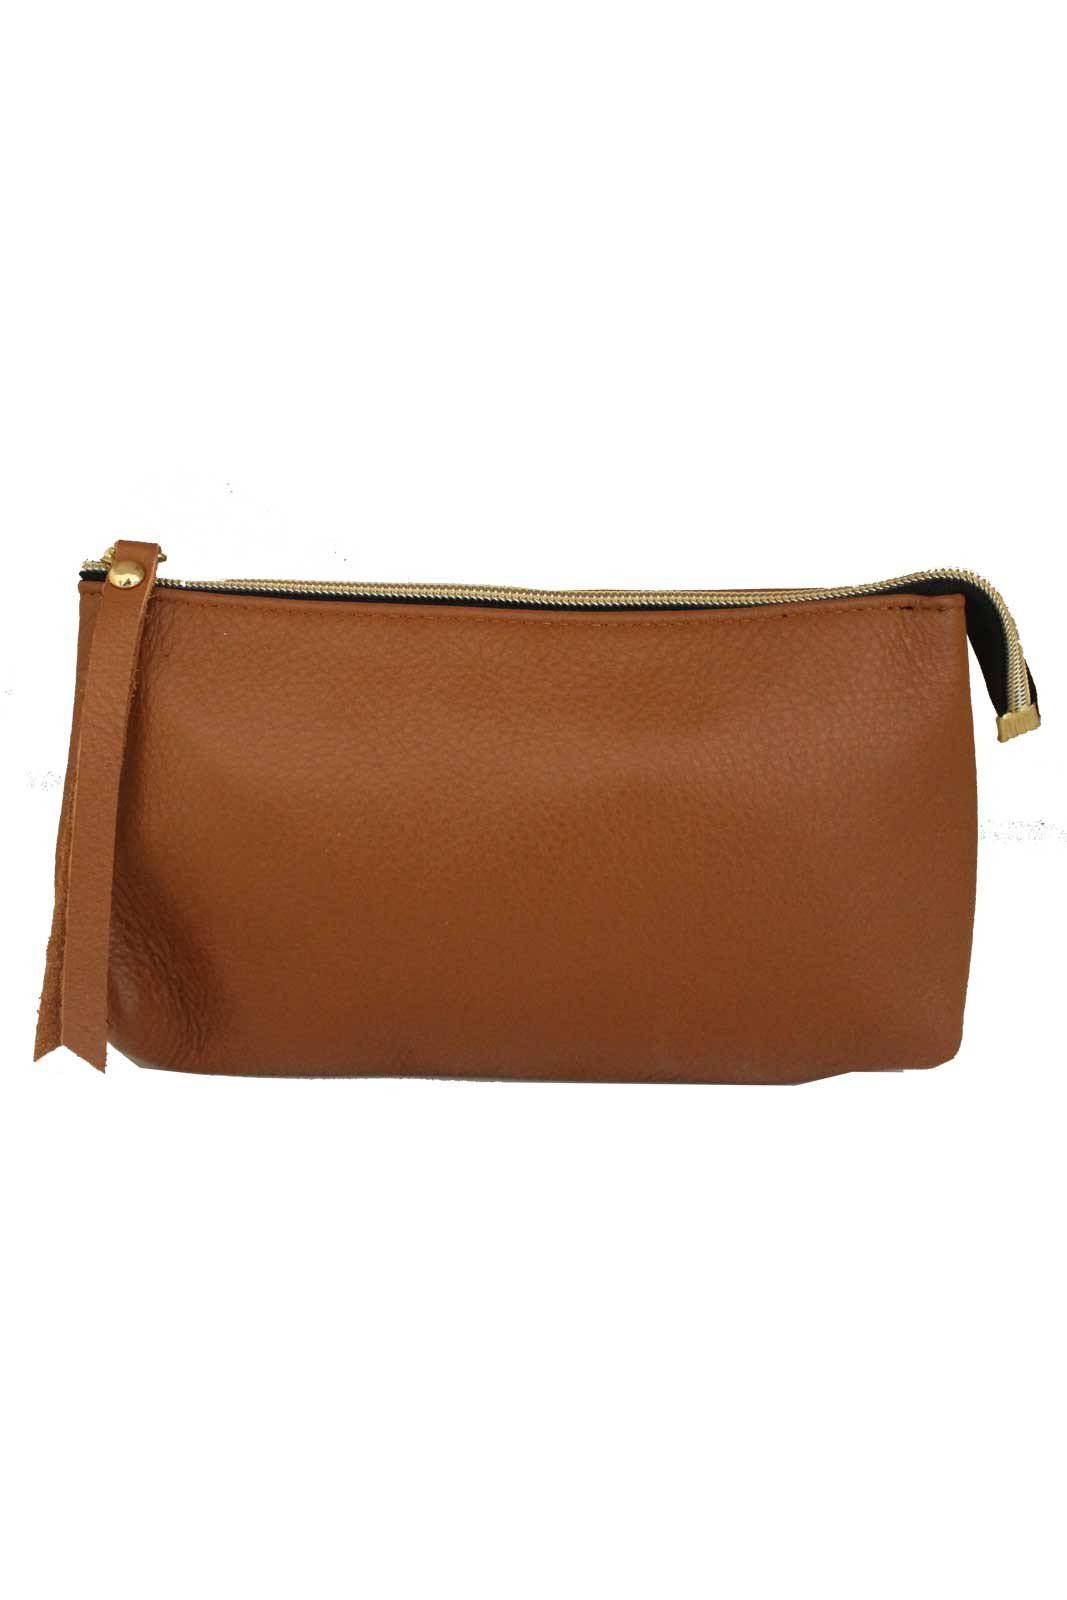 Classic Leather Purse - South of London